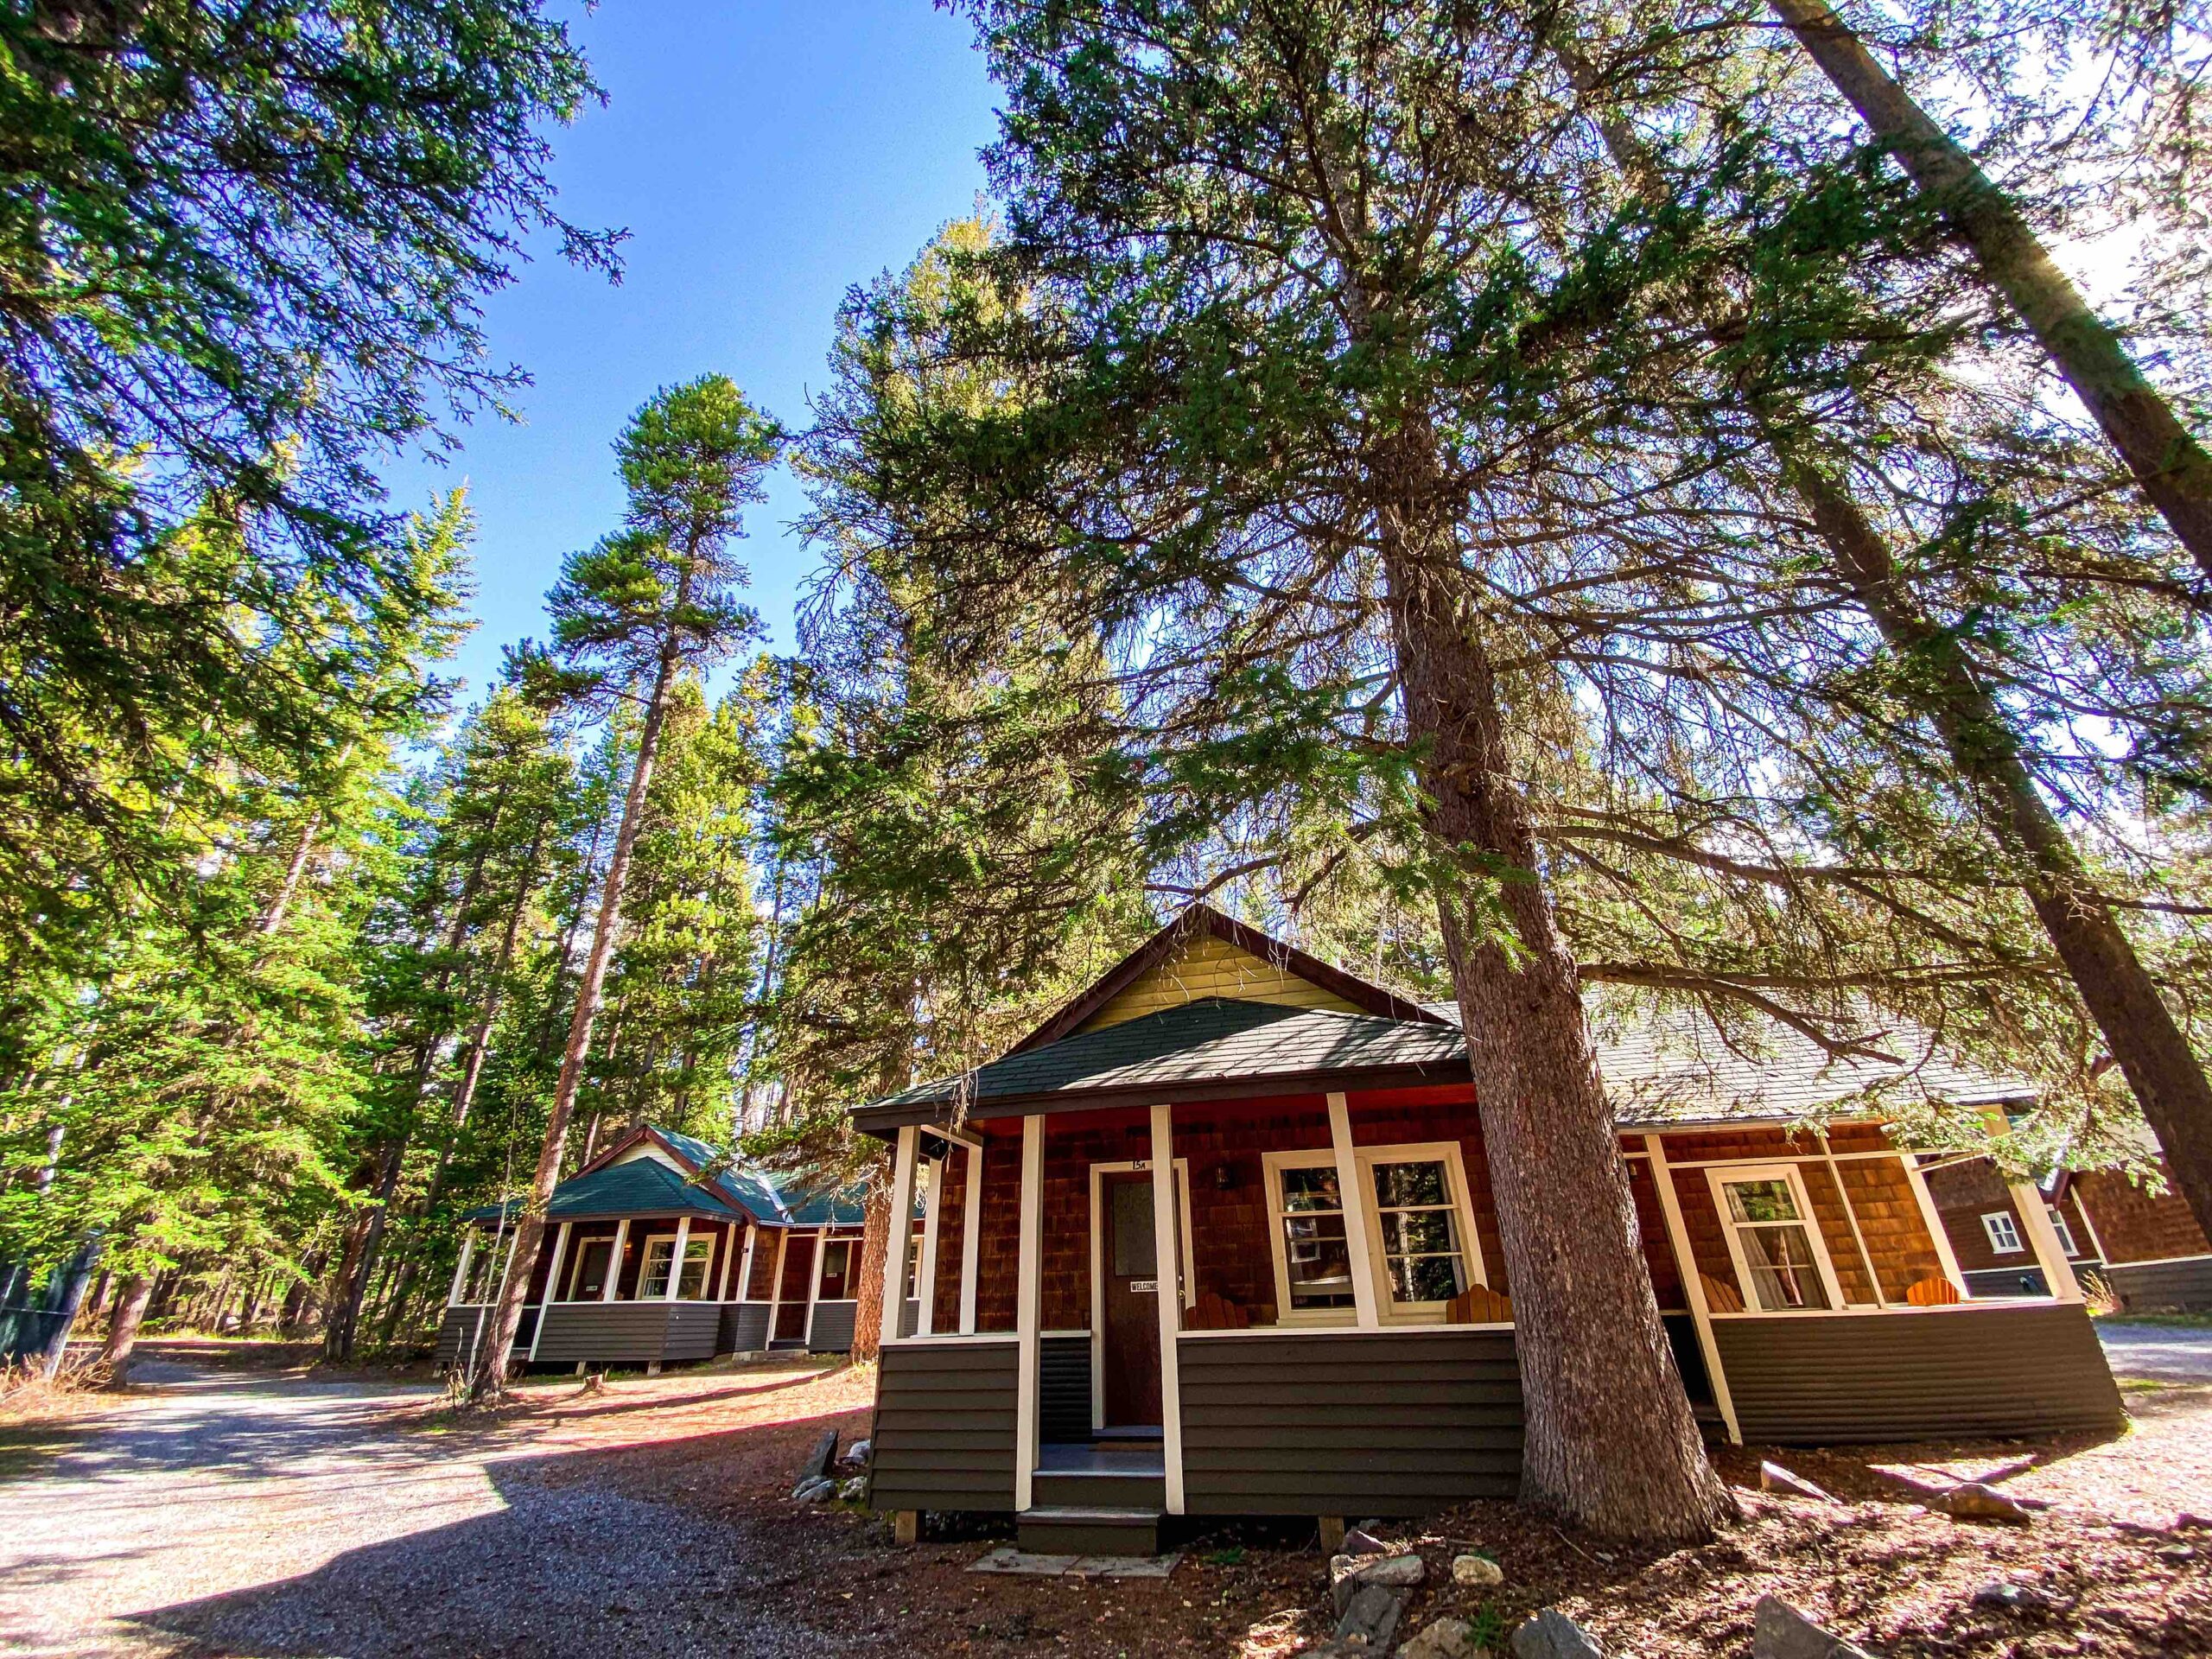 The cabin village of Johnston Canyon Lodge and Bungalows